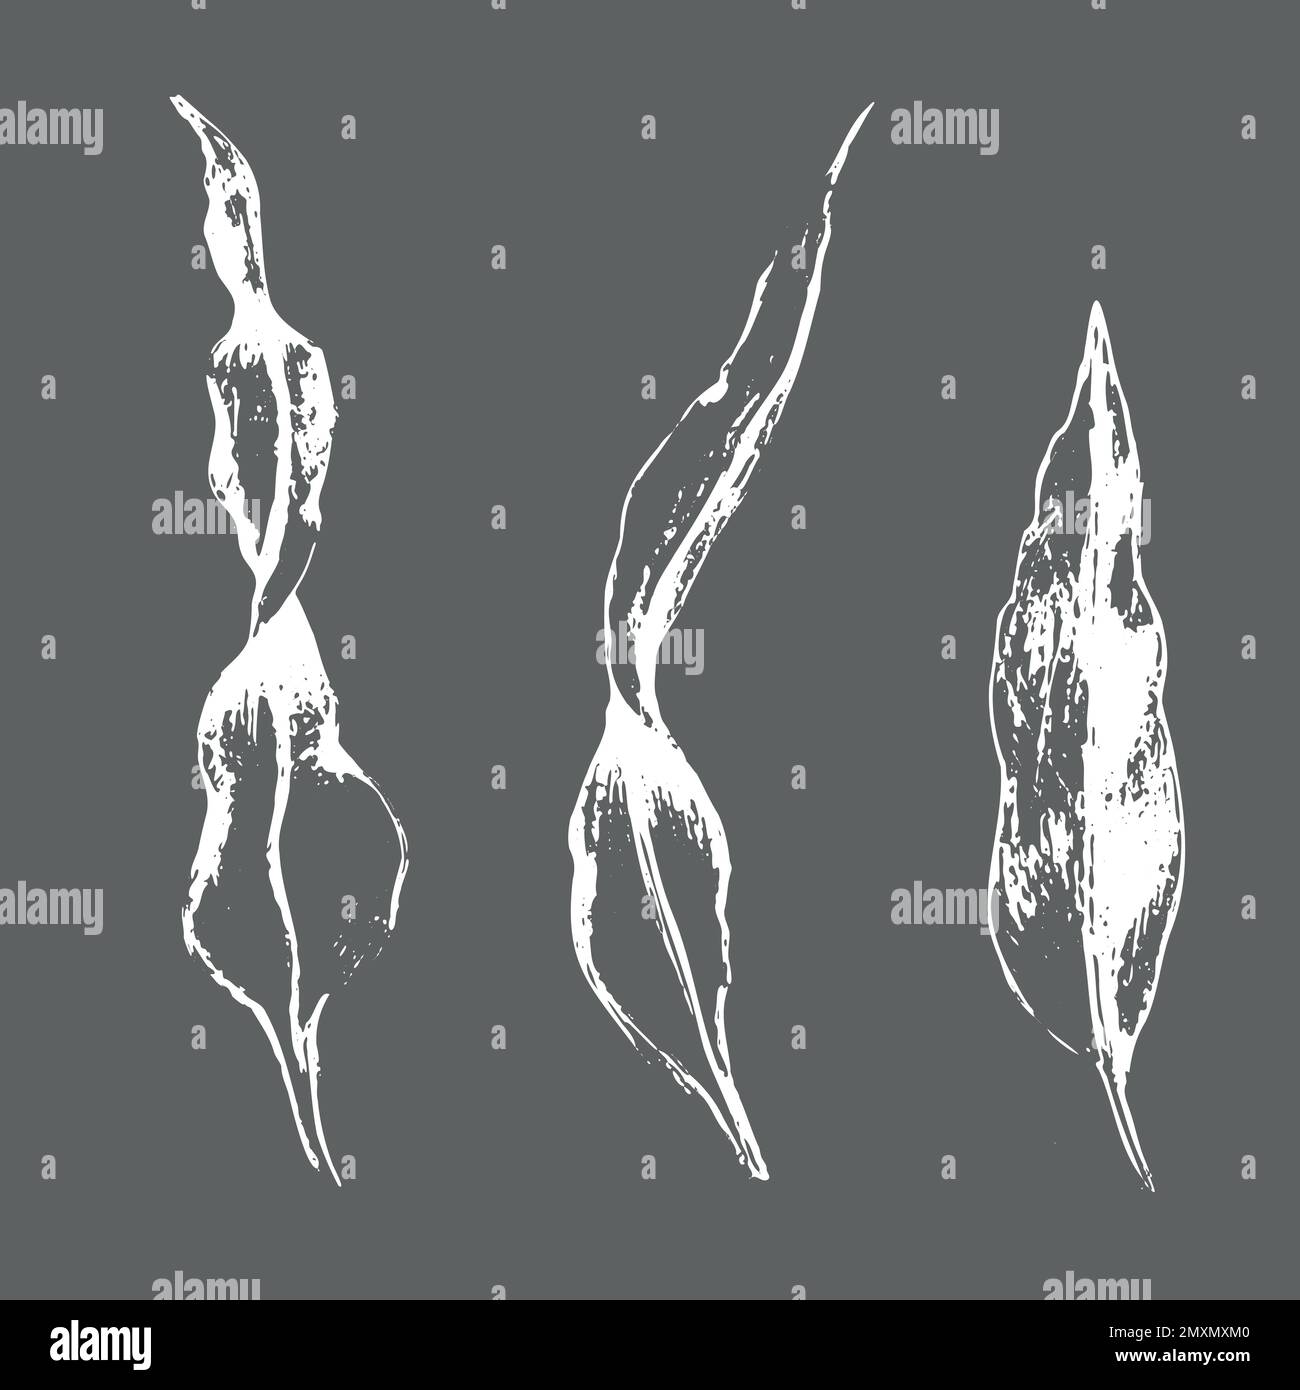 Seaweed or laminaria underwater, monochrome white colore sketch vector illustration isolated on gray background. Stock Vector